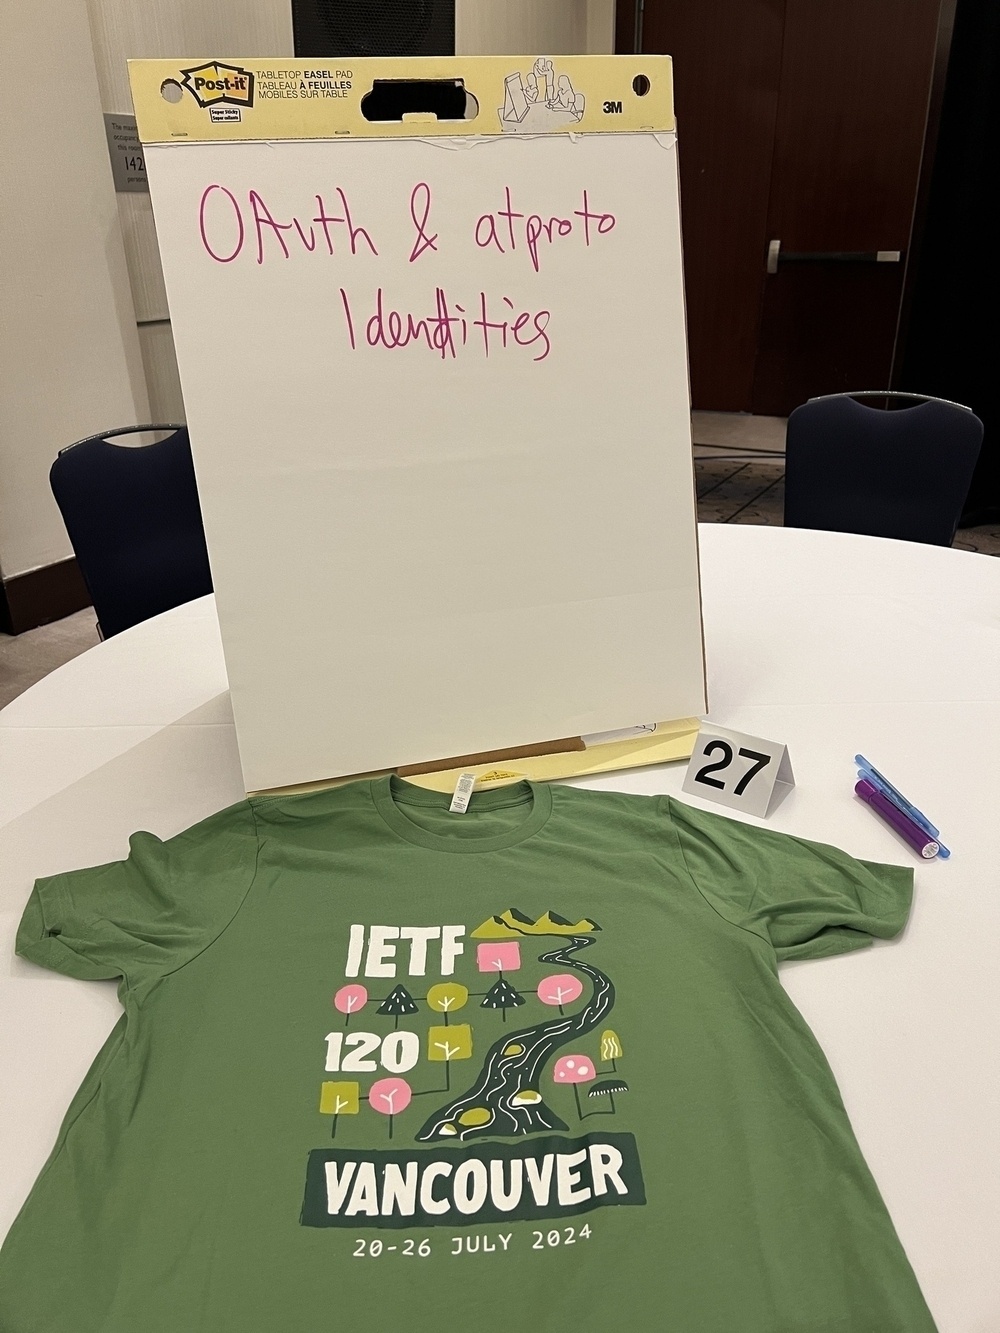 Tabletop easel with the words “OAuth & atproto identities”. On the table is a t-shirt commemorating IETF120 in Vancouver 